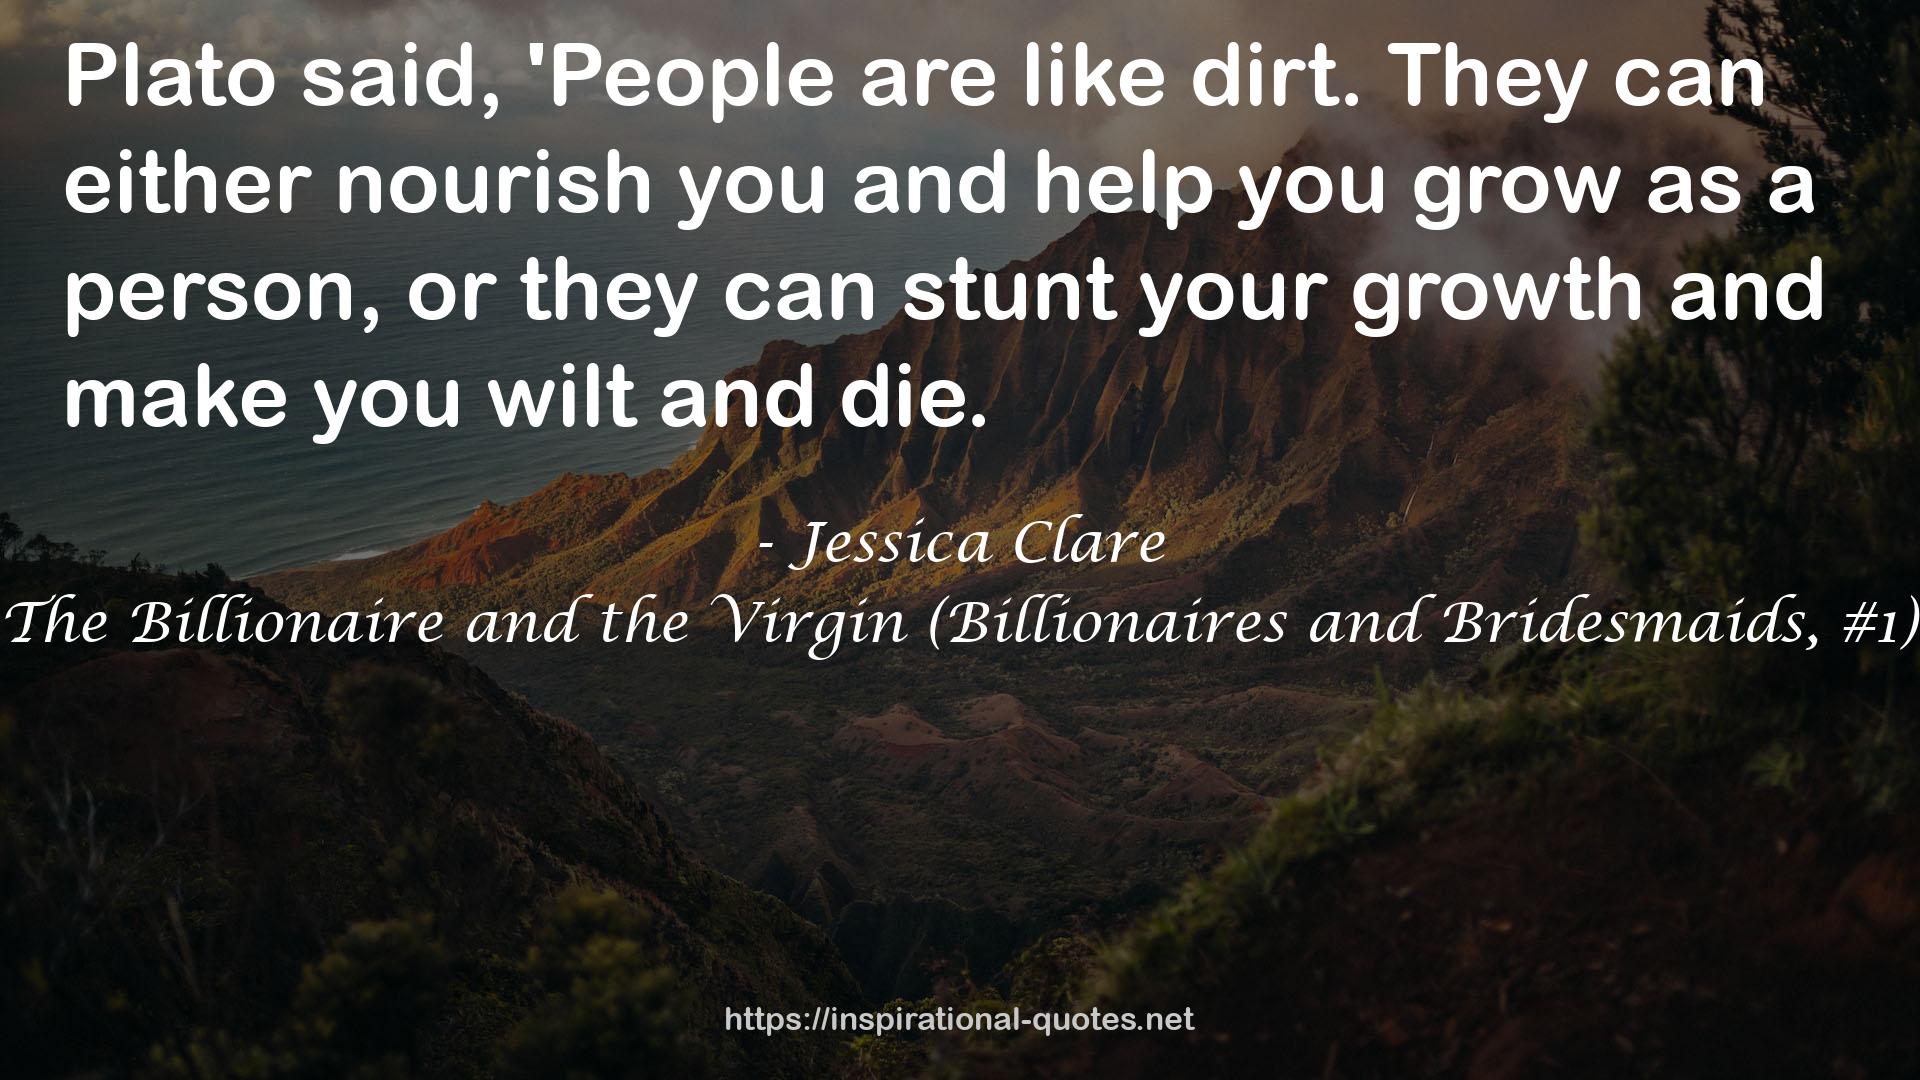 The Billionaire and the Virgin (Billionaires and Bridesmaids, #1) QUOTES